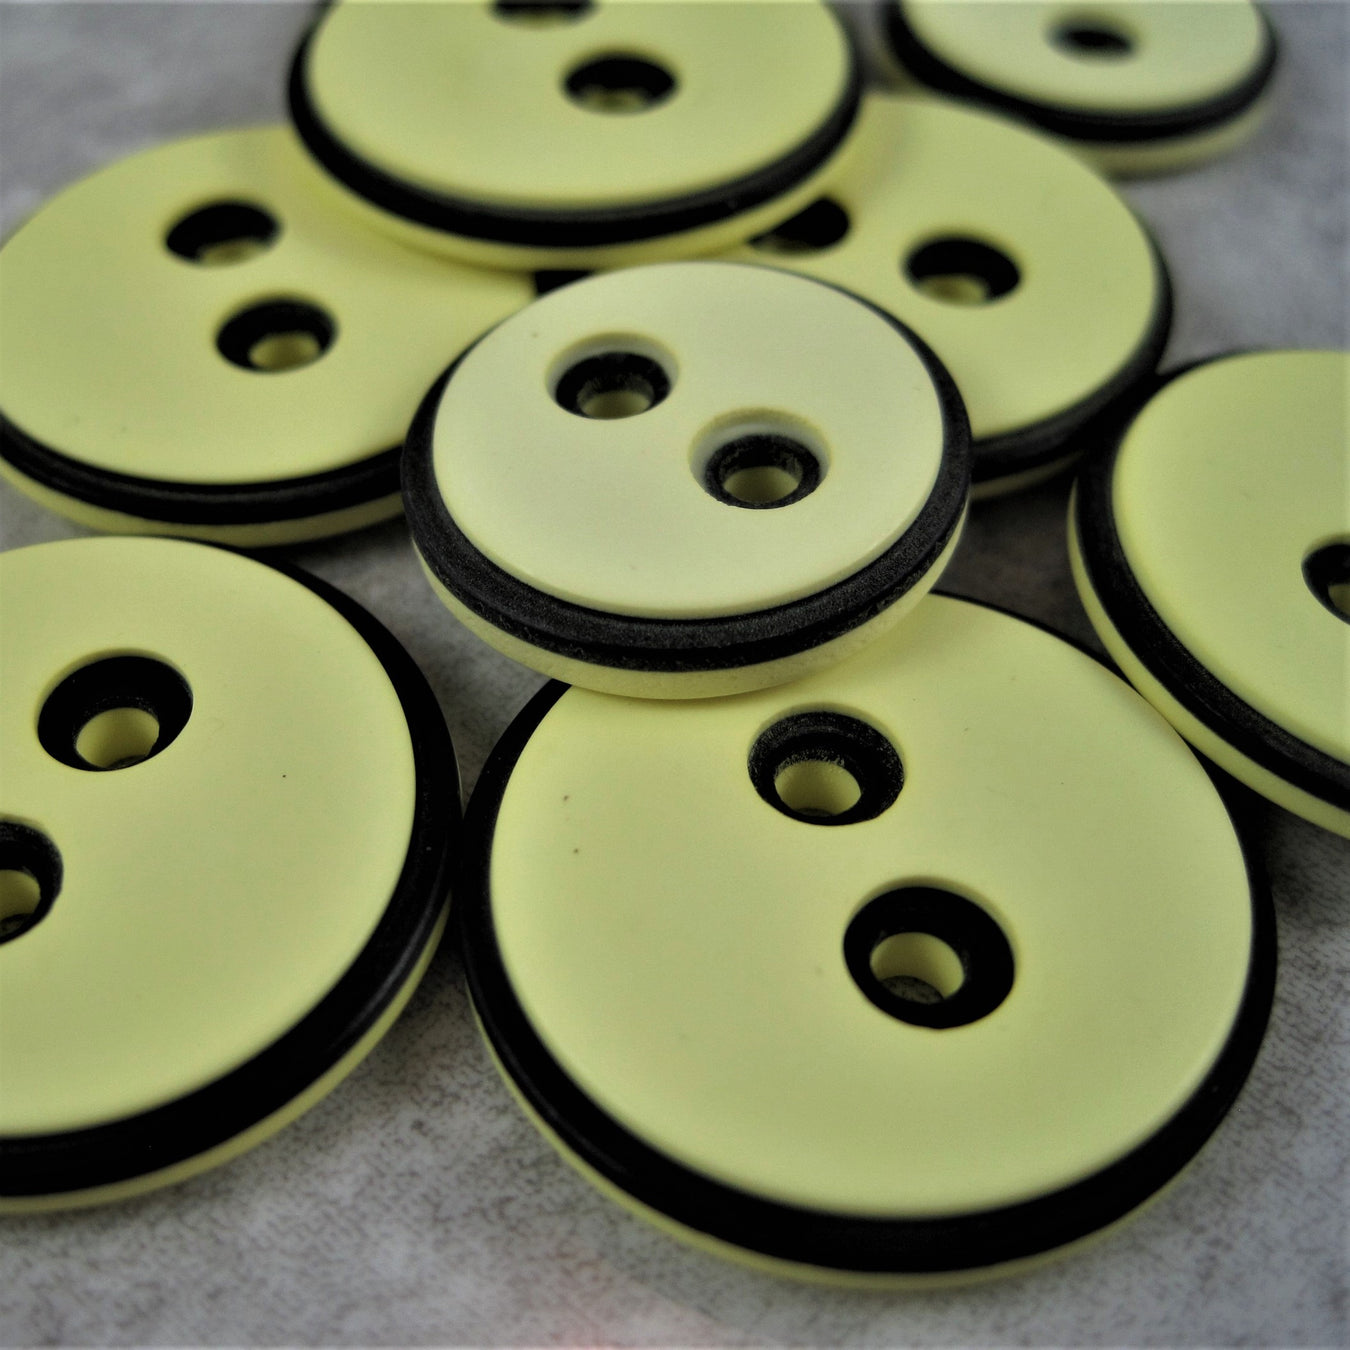 Yellow Buttons